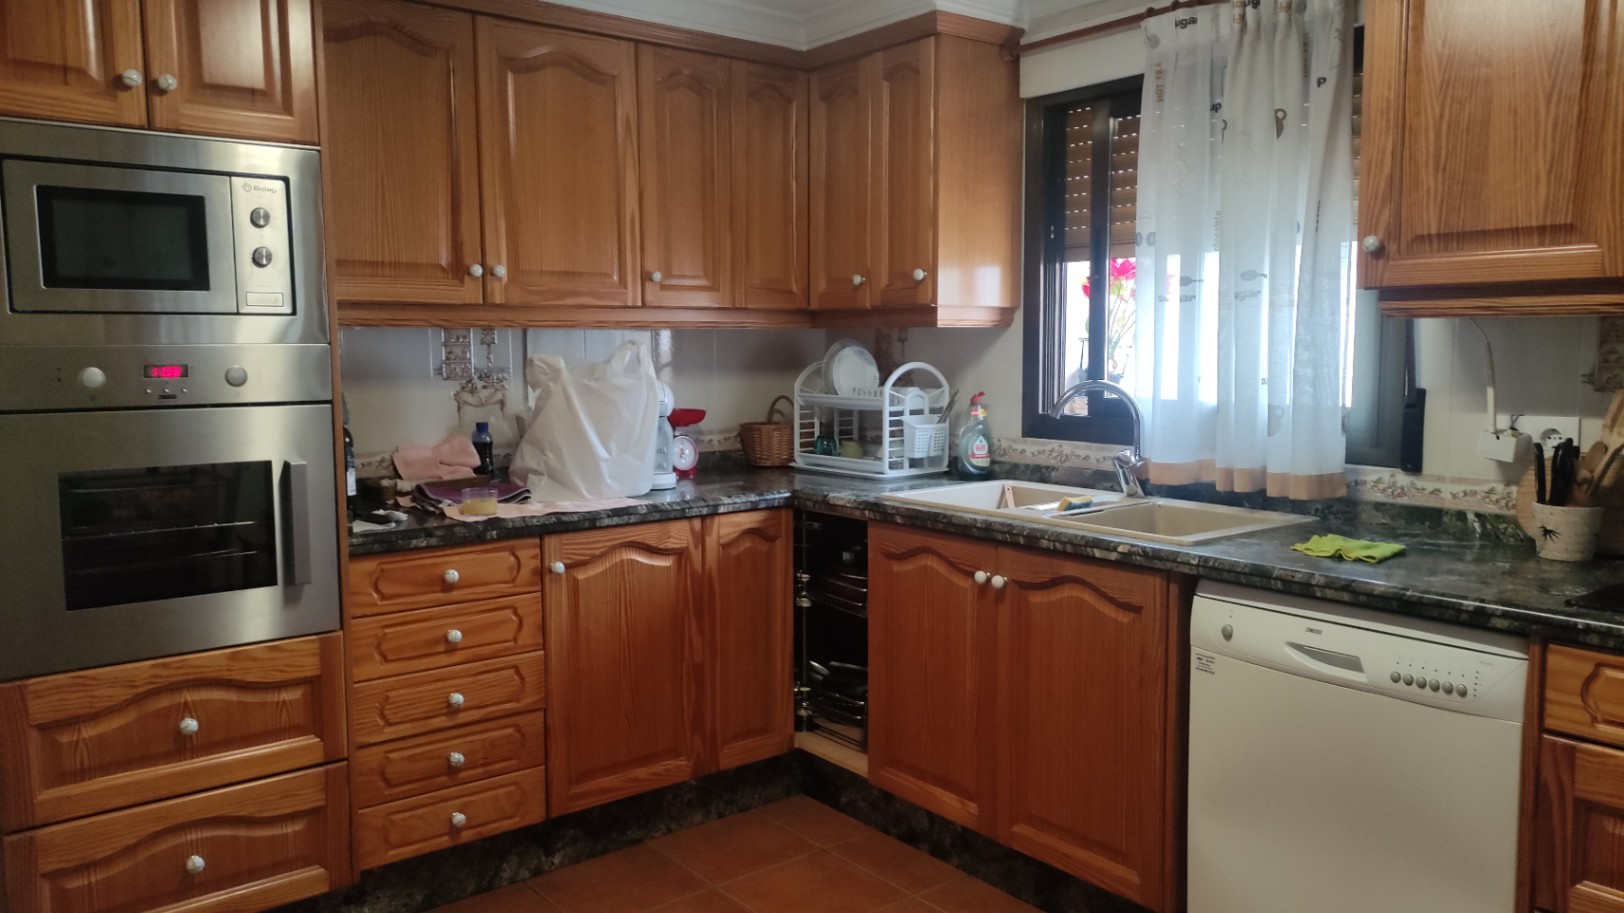 Townhouse for sale in Benissa